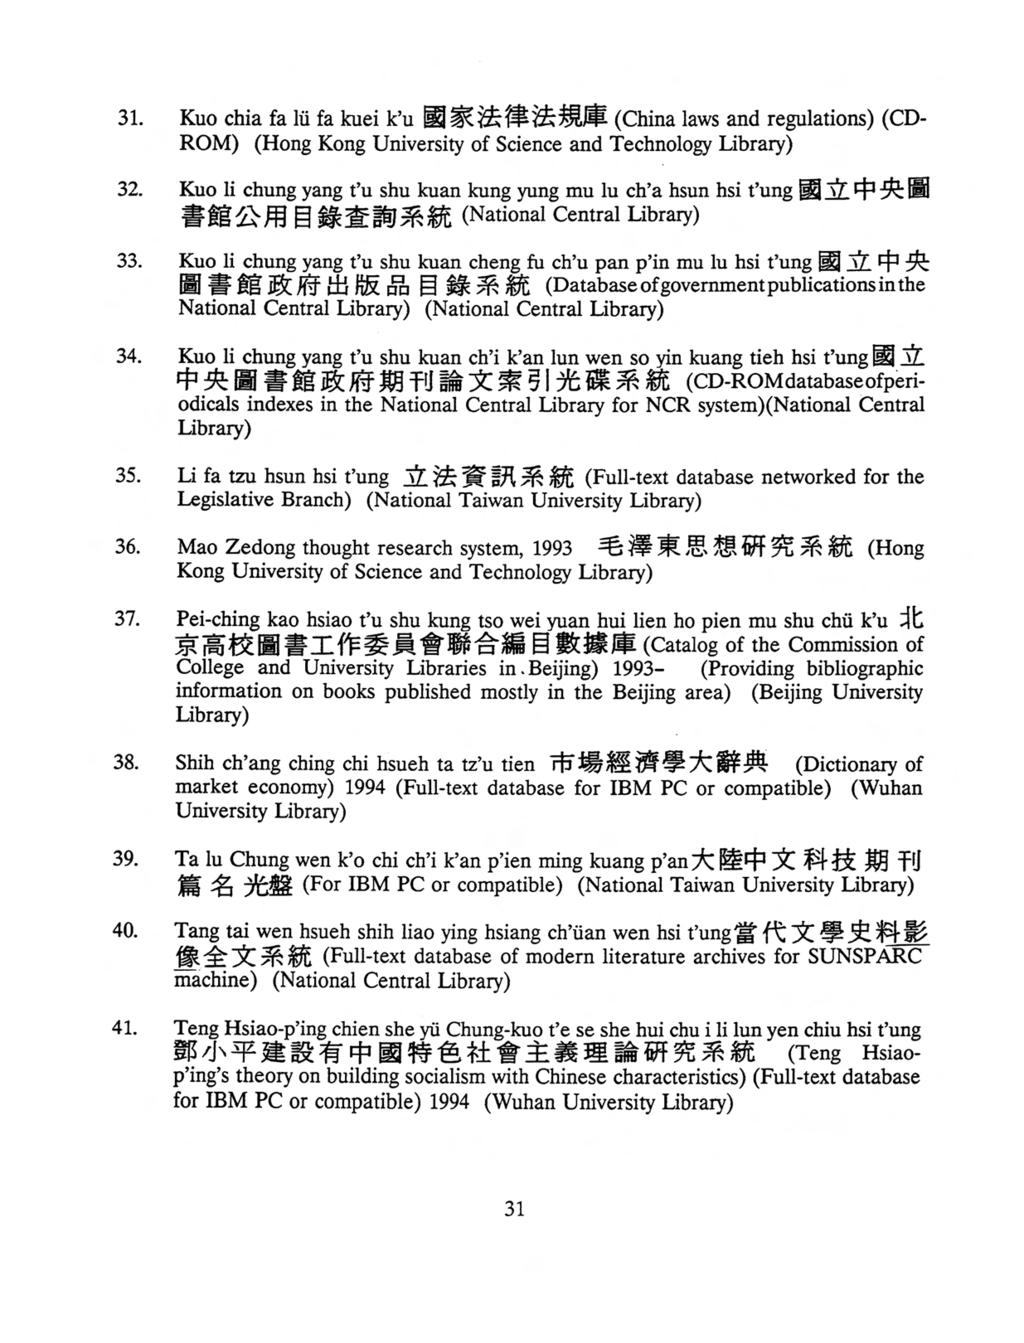 31. Kuo chia fa lii fa kuei k'u St^&fS^feSPR (China laws and regulations) (CD- ROM) (Hong Kong University of Science and Technology Library) 32.